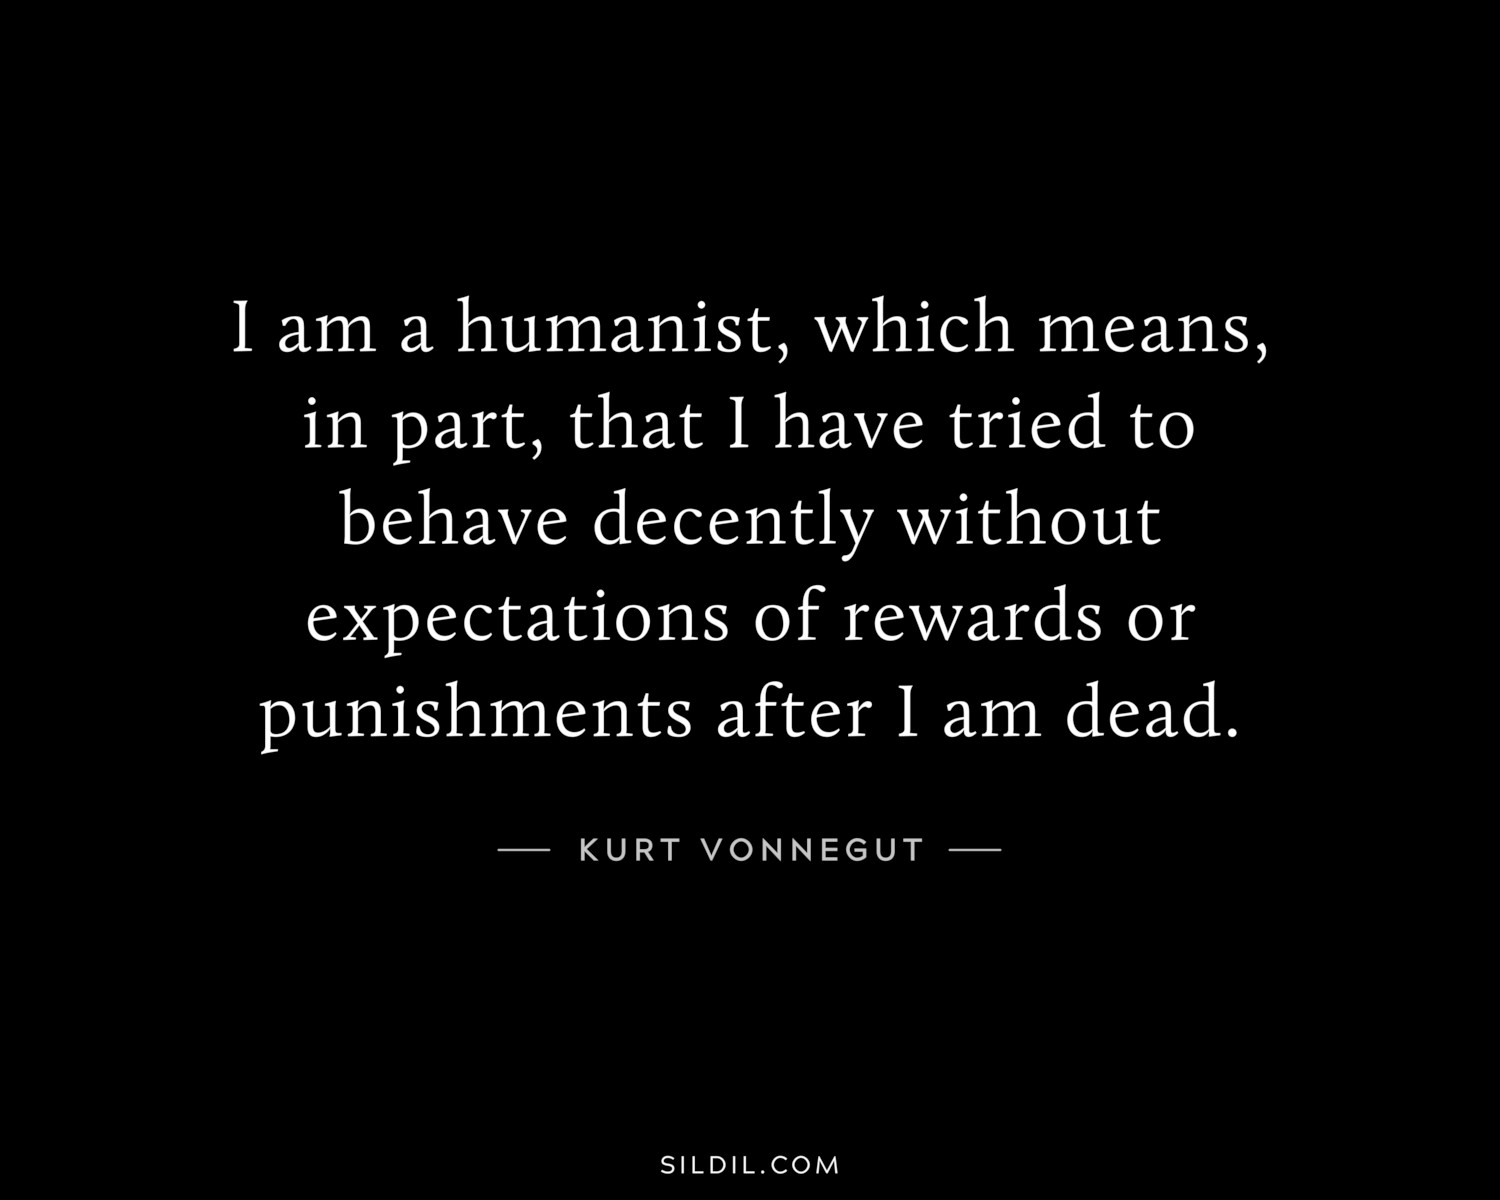 I am a humanist, which means, in part, that I have tried to behave decently without expectations of rewards or punishments after I am dead.